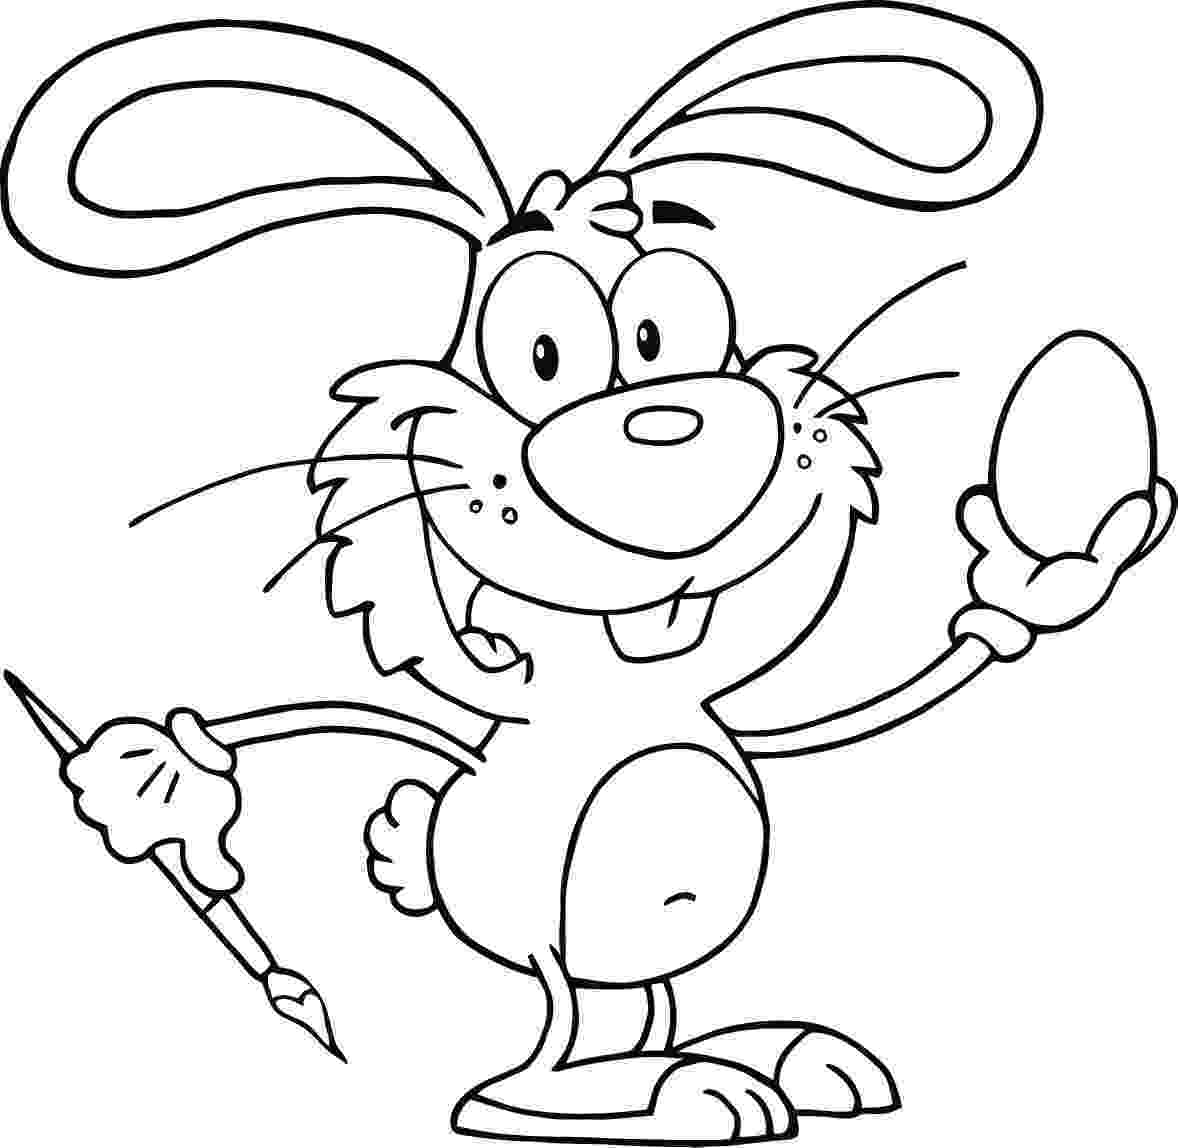 rabbit coloring pages printable 60 rabbit shape templates and crafts colouring pages coloring printable rabbit pages 